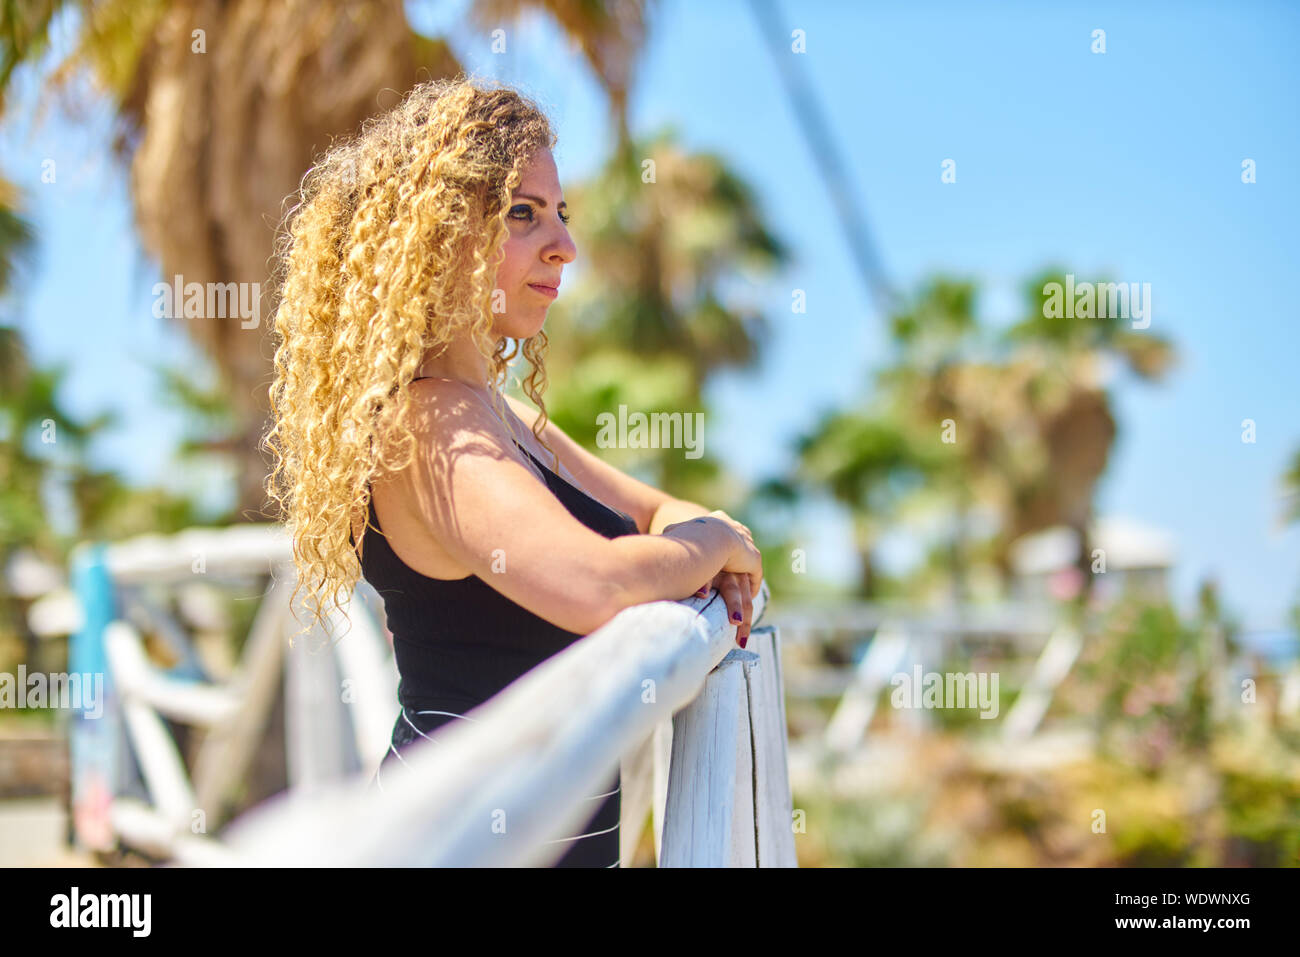 Thoughtful Young Woman With Blond Curly Hair Standing By Railing Against Sky Stock Photo